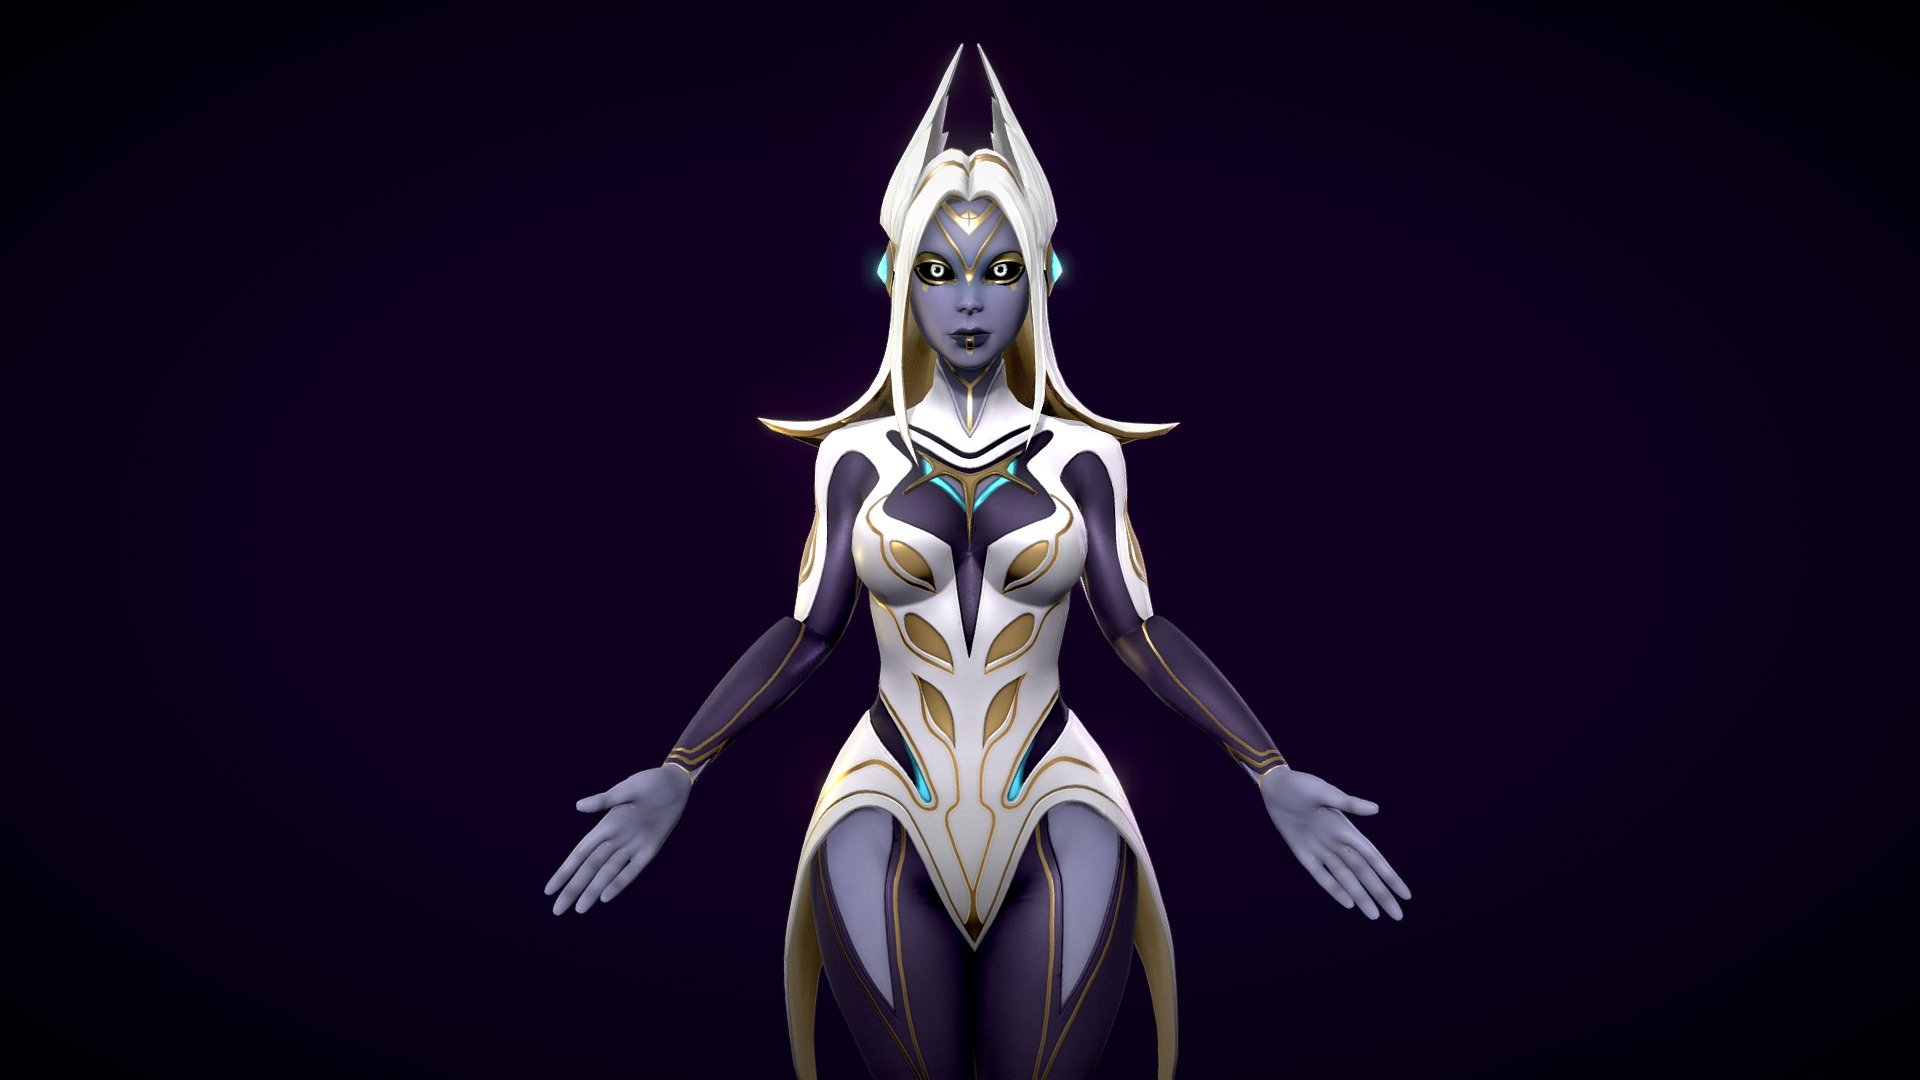 Animation and 3D-model made in Blender, texturing in Substance Painter.

Unrealesed Fortnite skin. Based on a concept (https://fortnite.gg/best-survey-skins?unreleased).

UPD

Skin released
  - Triarch aurora - 3D model by RegnadBIT 3d model